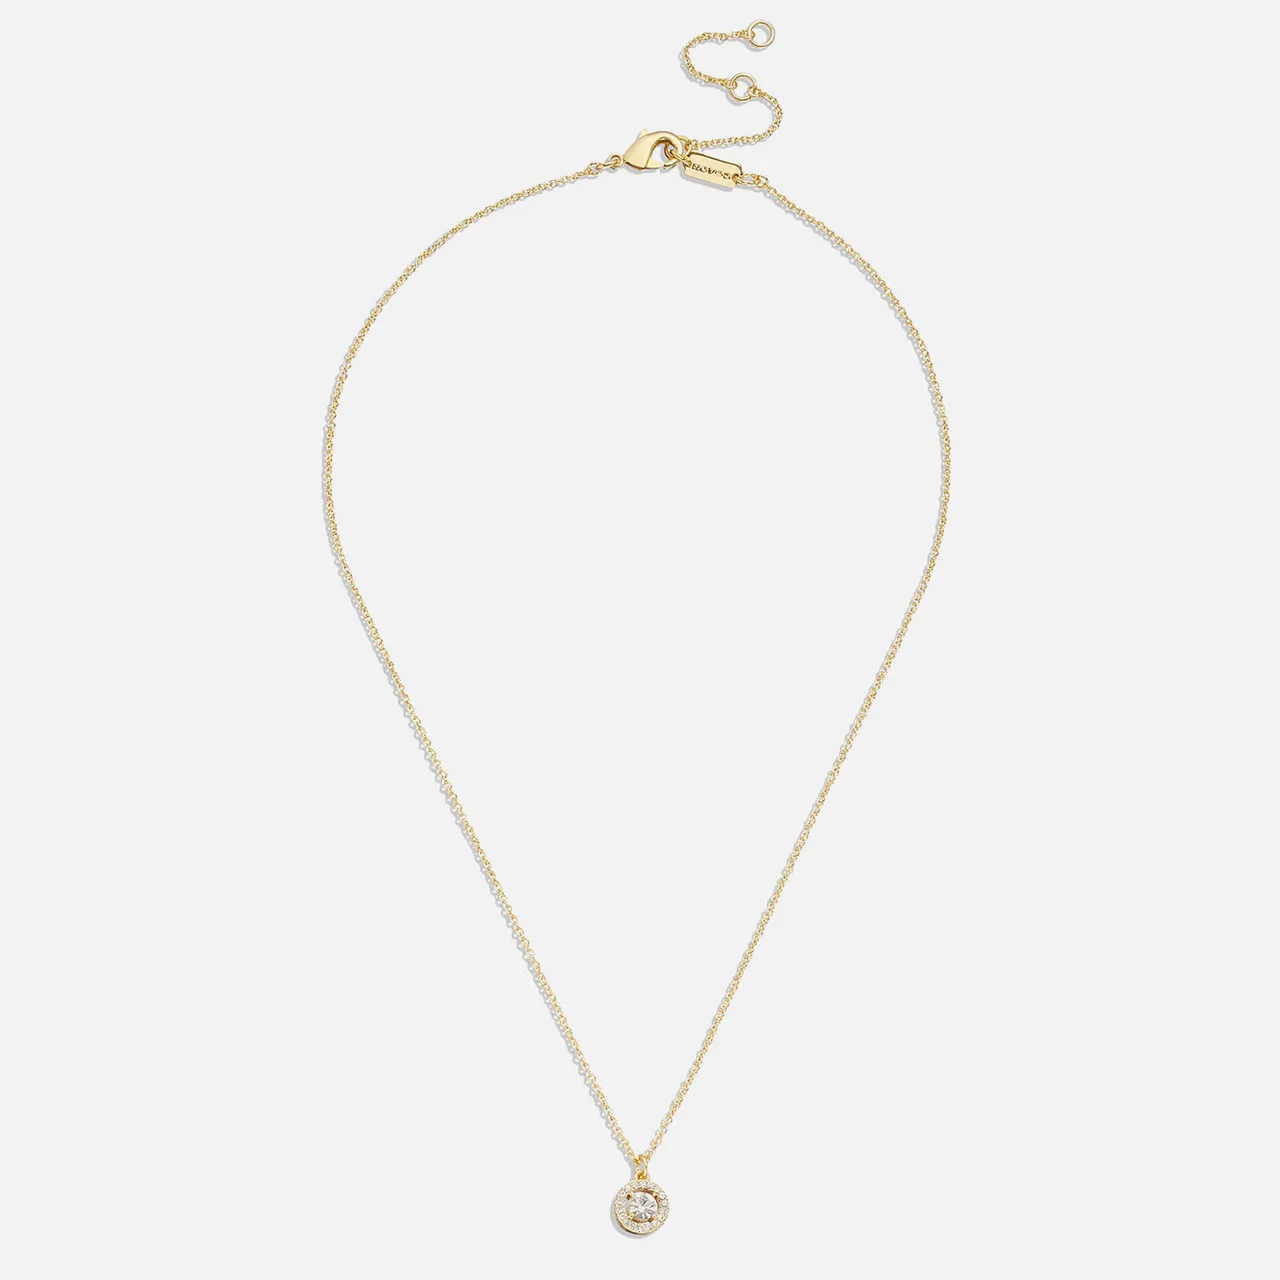 Coach Pave Halo Pendant Gold-Plated Necklace